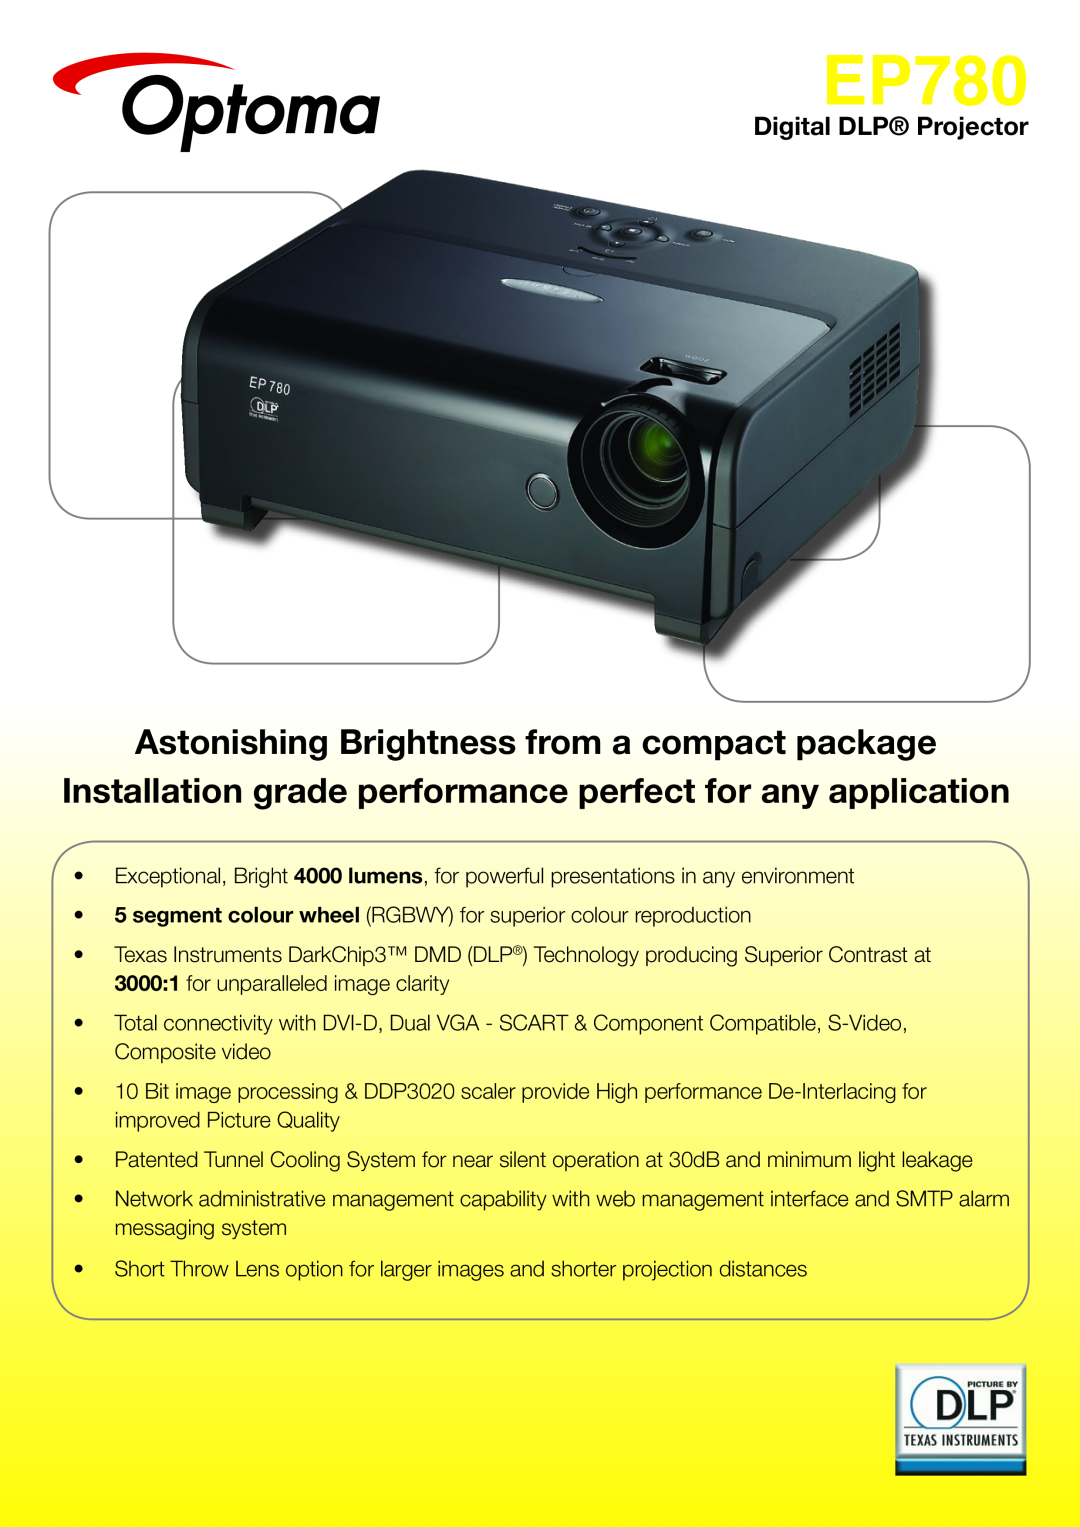 Texas Instruments ep780 manual Digital DLP Projector, EP780, Astonishing Brightness from a compact package 